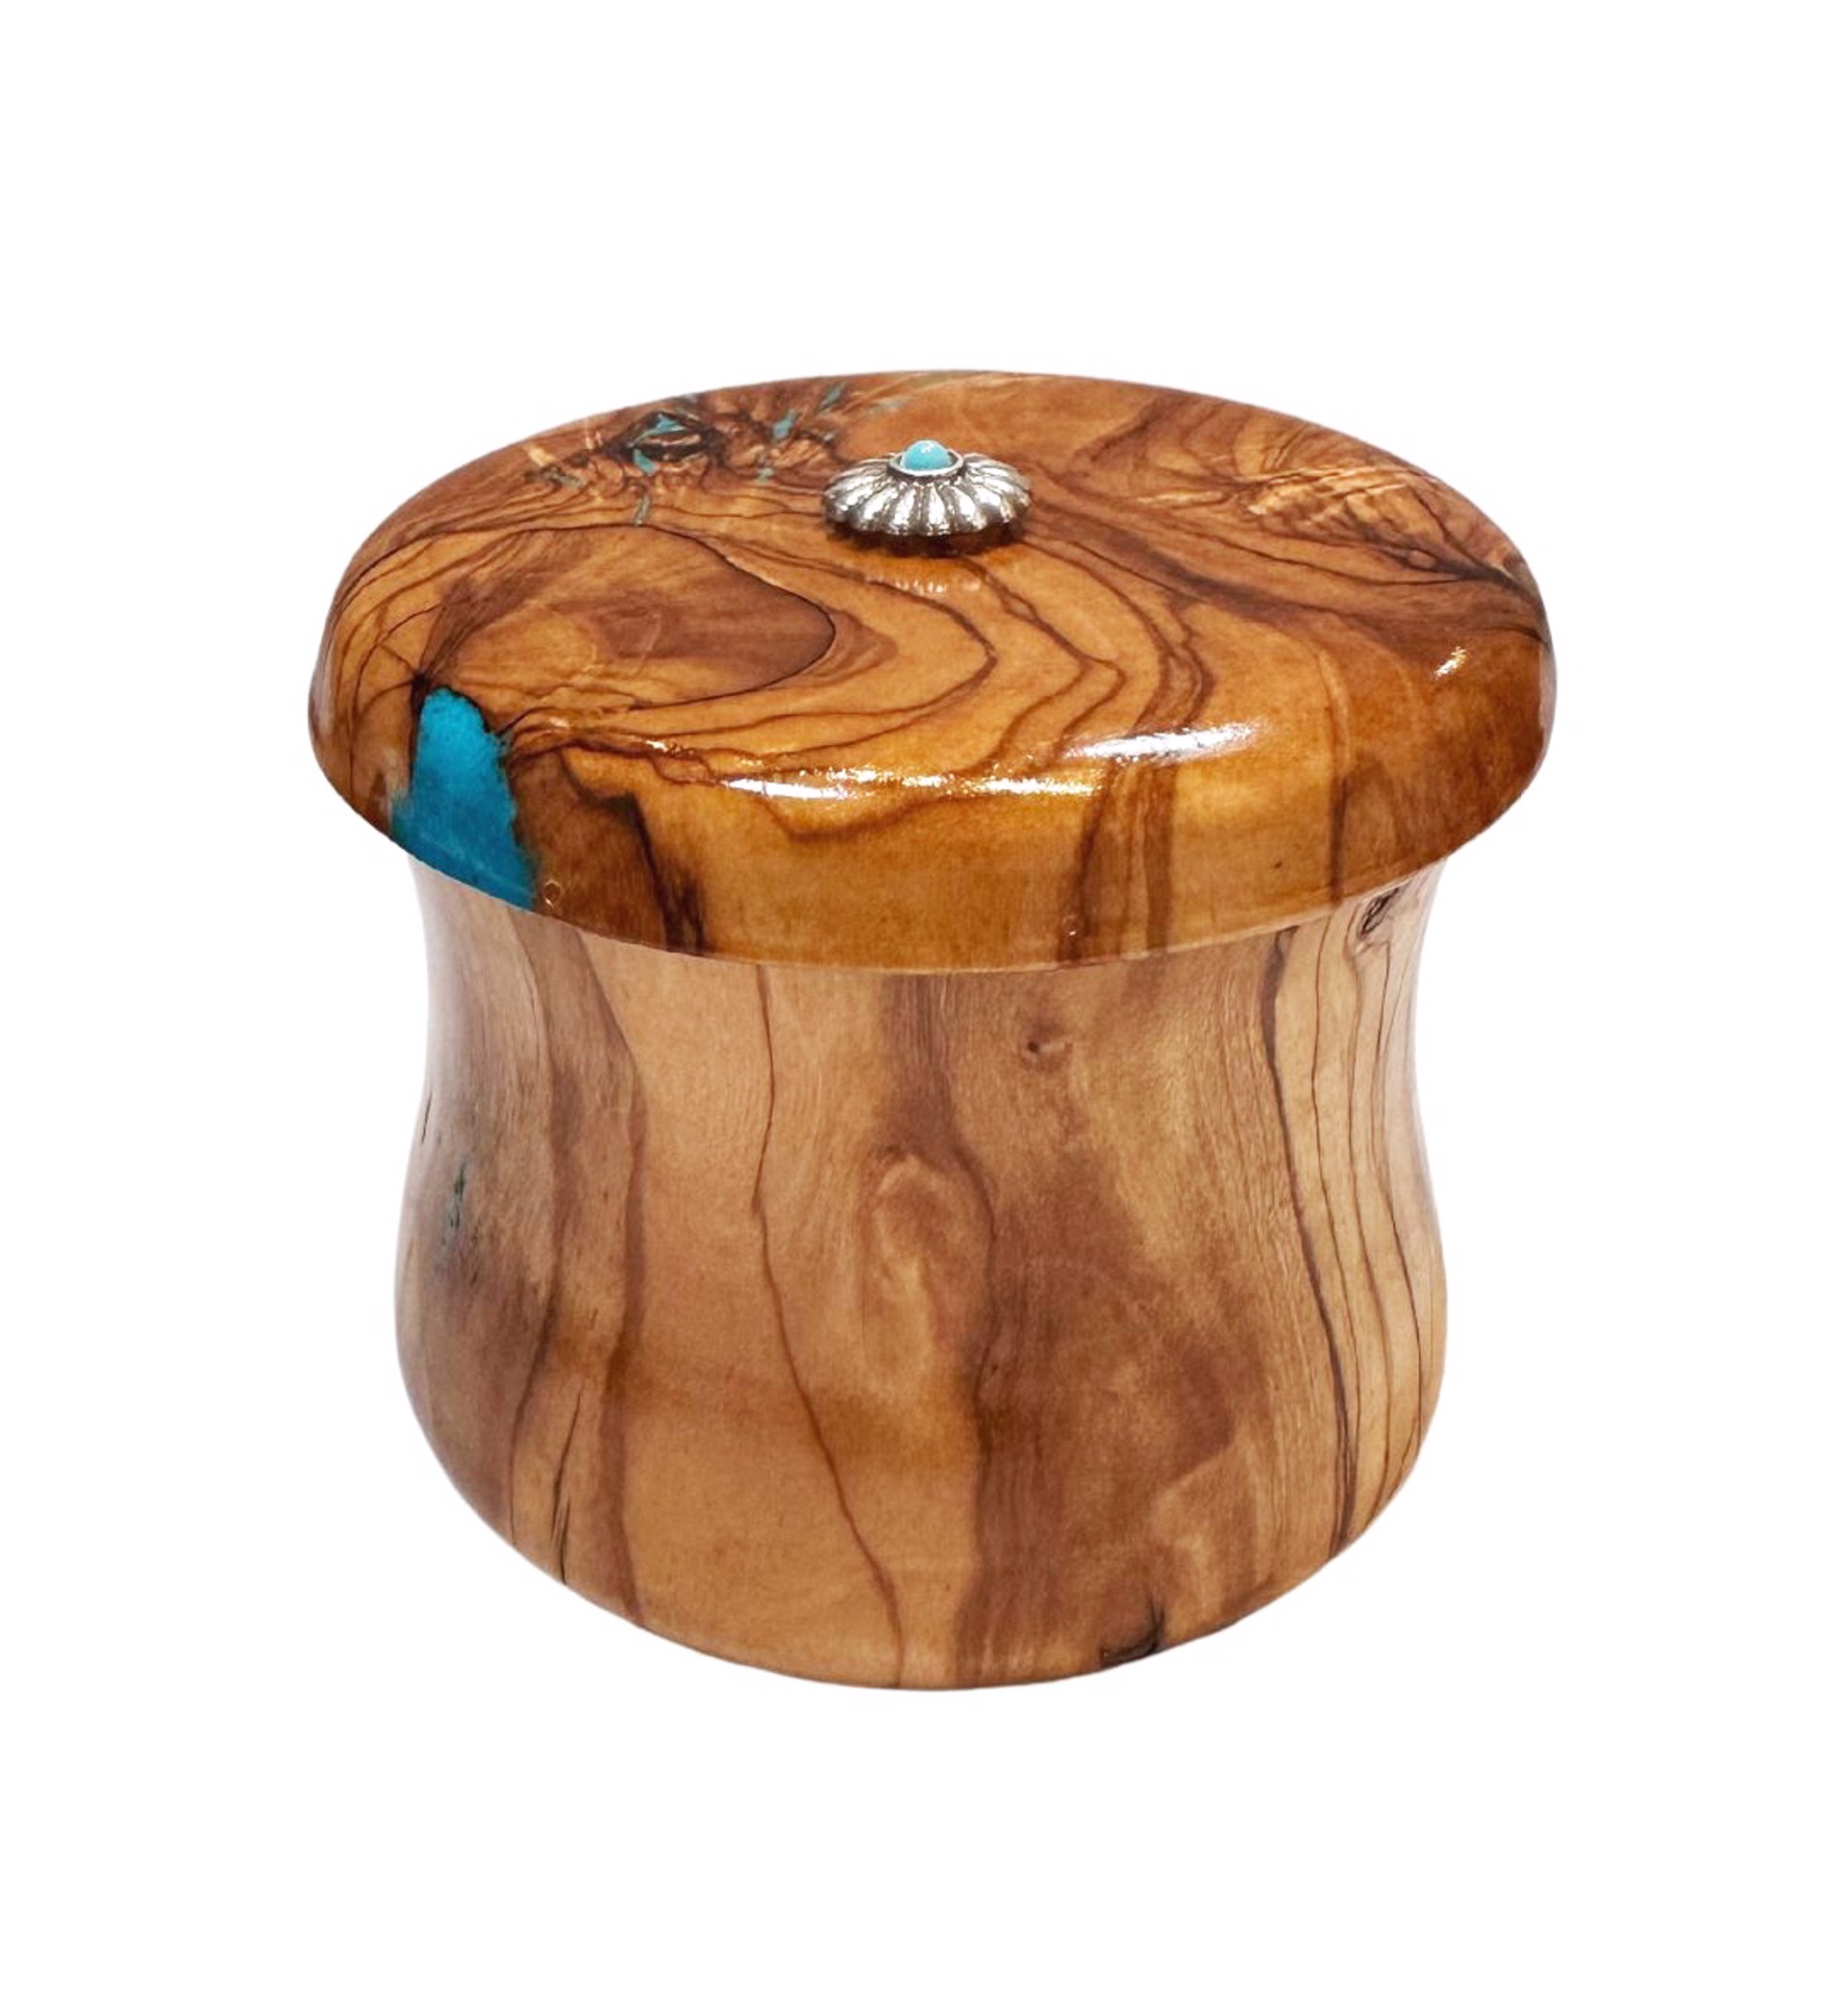 Spalted Elder Lidded Bow with Turquoise Inlay & Silver Rosette by Jim Scott